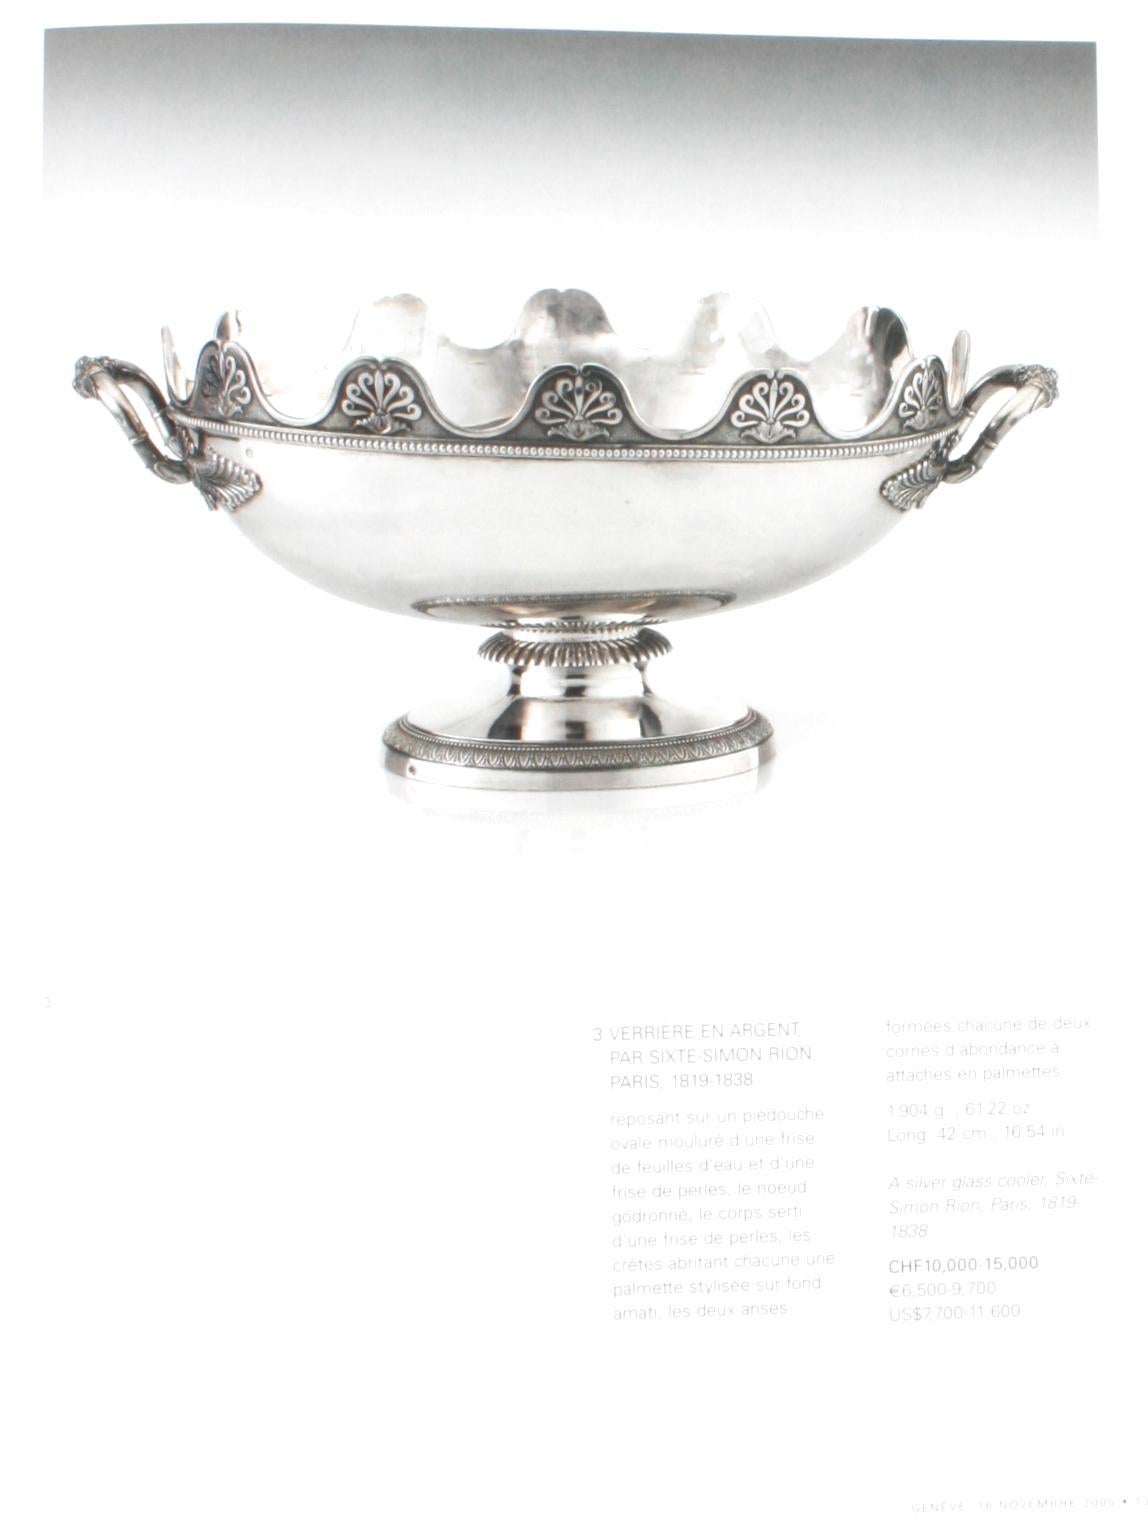 Sotheby's Geneva; Important European Silver From the Diane Collection. Geneva: Sotheby's, 2005. Softcover with French and English text. 107 pp. The single-owner sale includes silver chocolate pots, a large circular silver-gilt tray from the